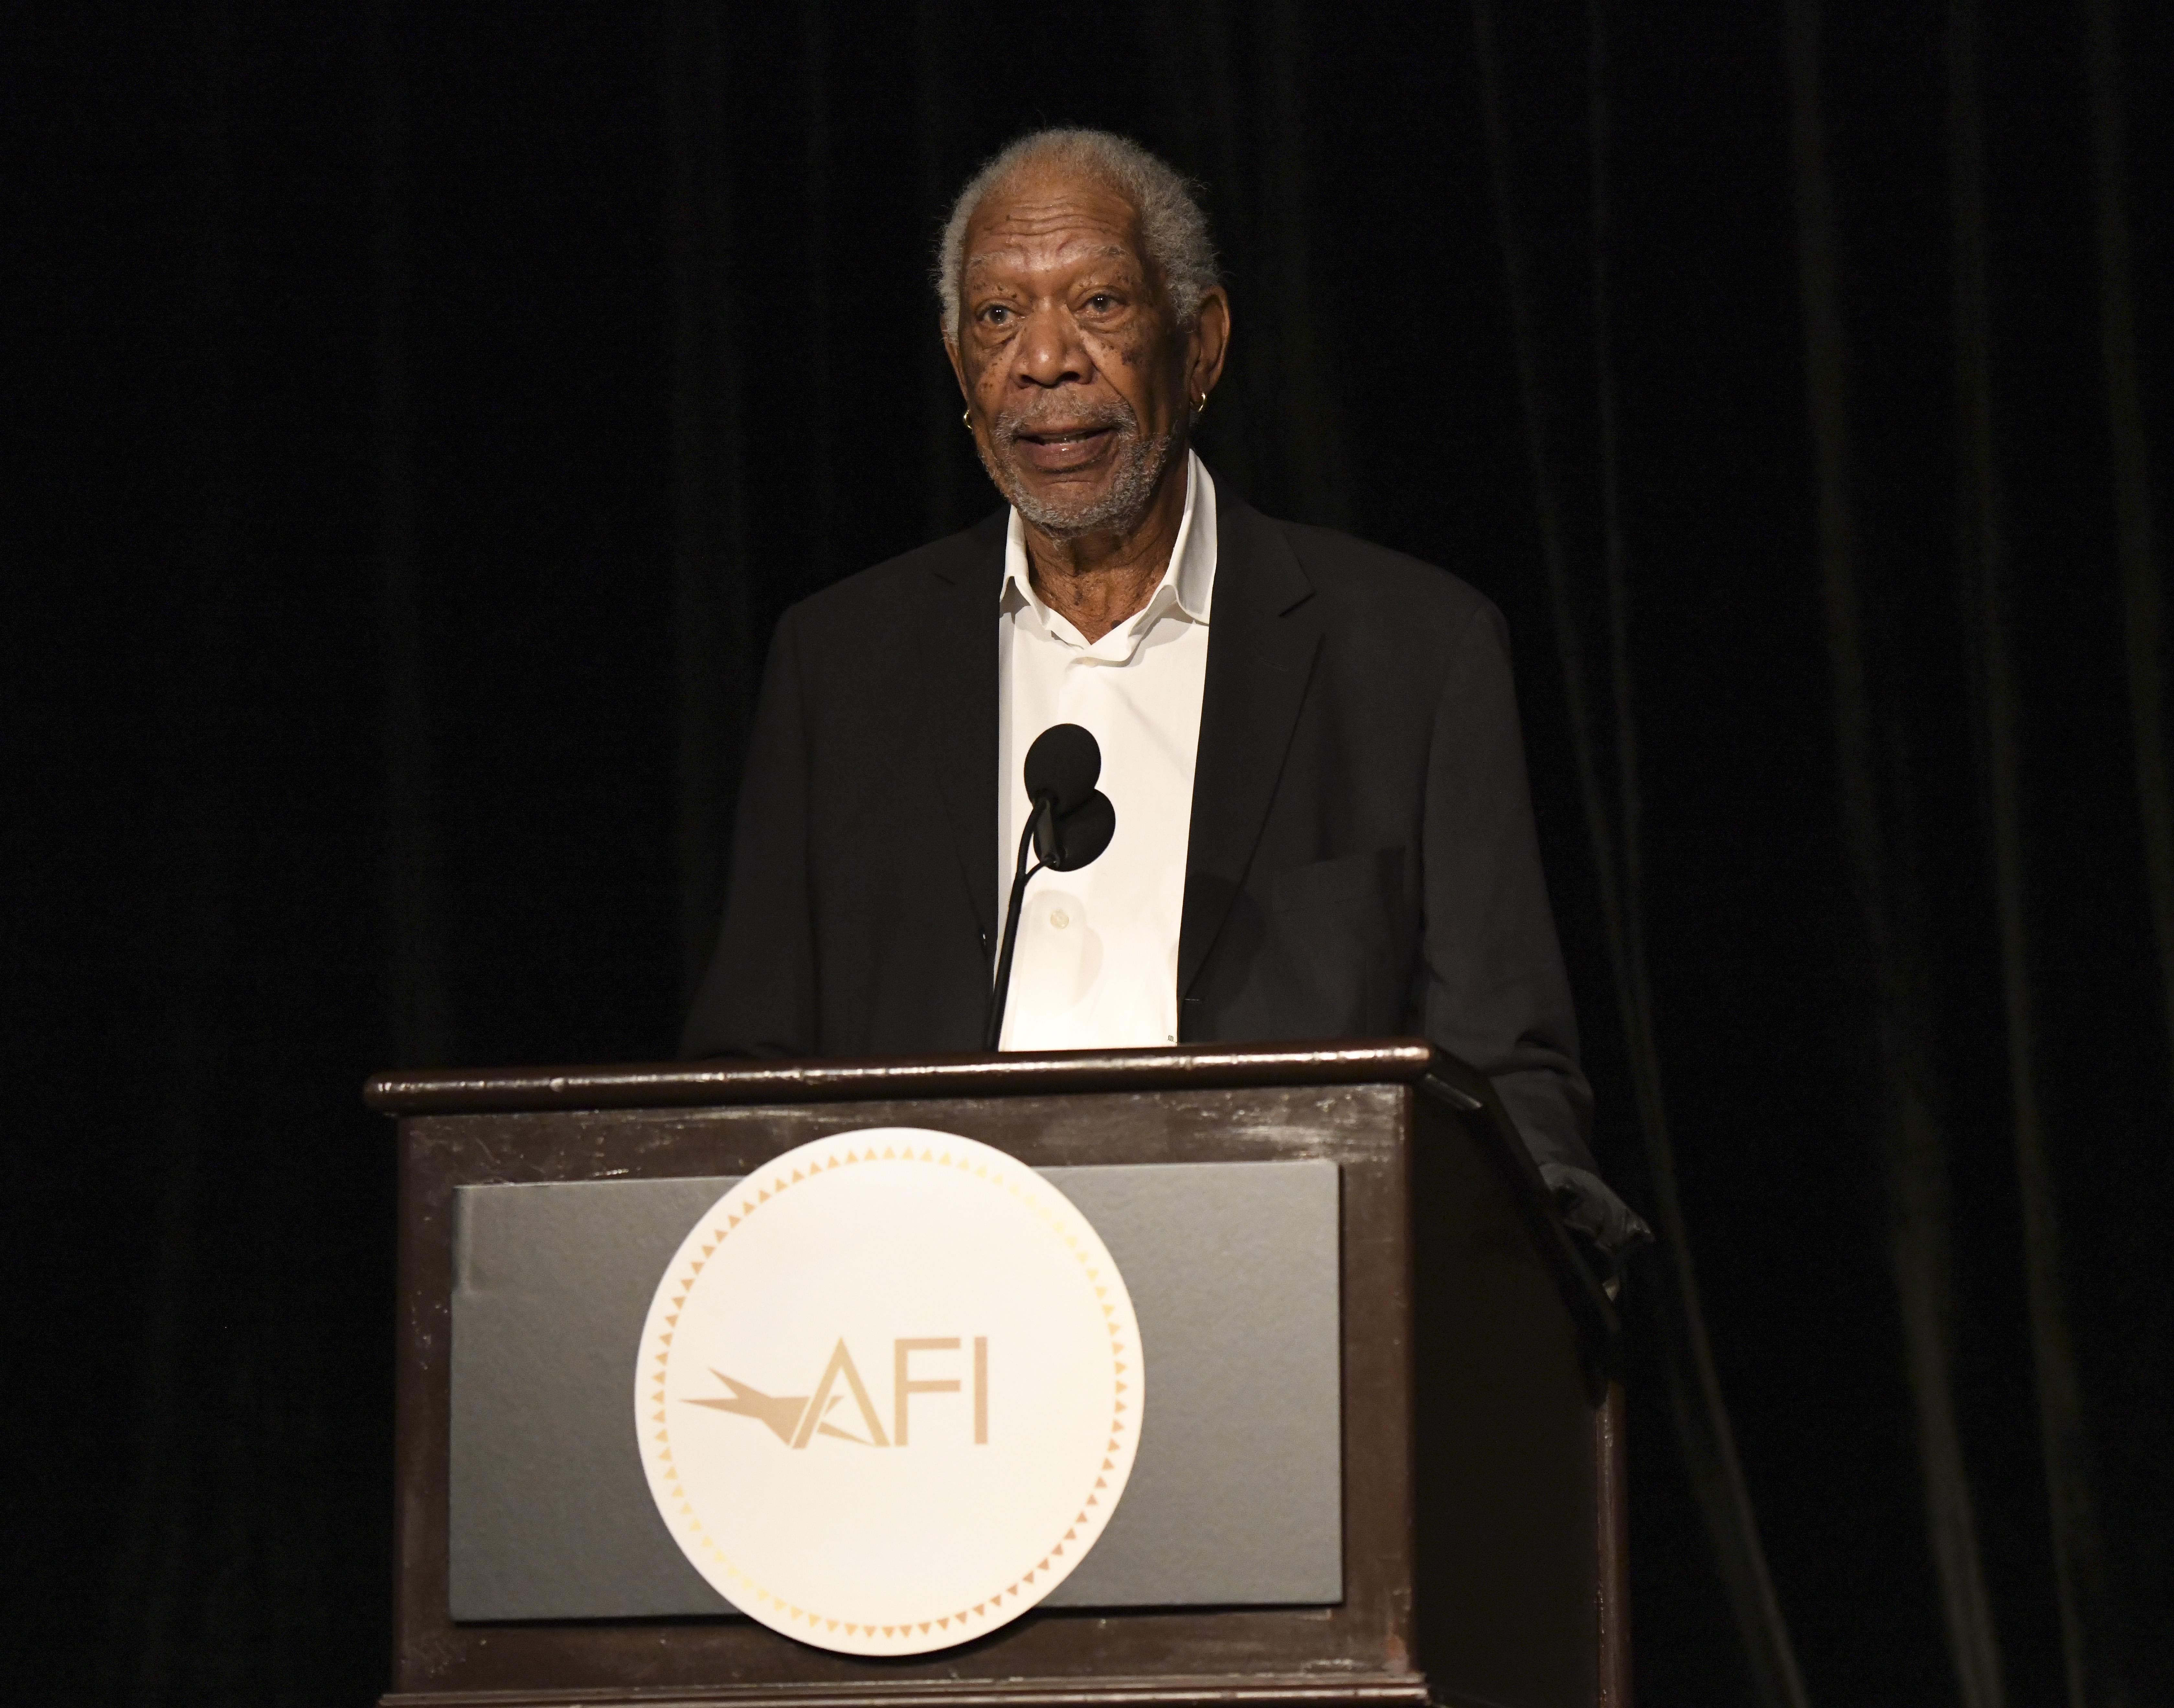 Morgan Freeman at the AFI Awards Luncheon in Beverly Hills, California on March 11, 2022 | Source: Getty Images